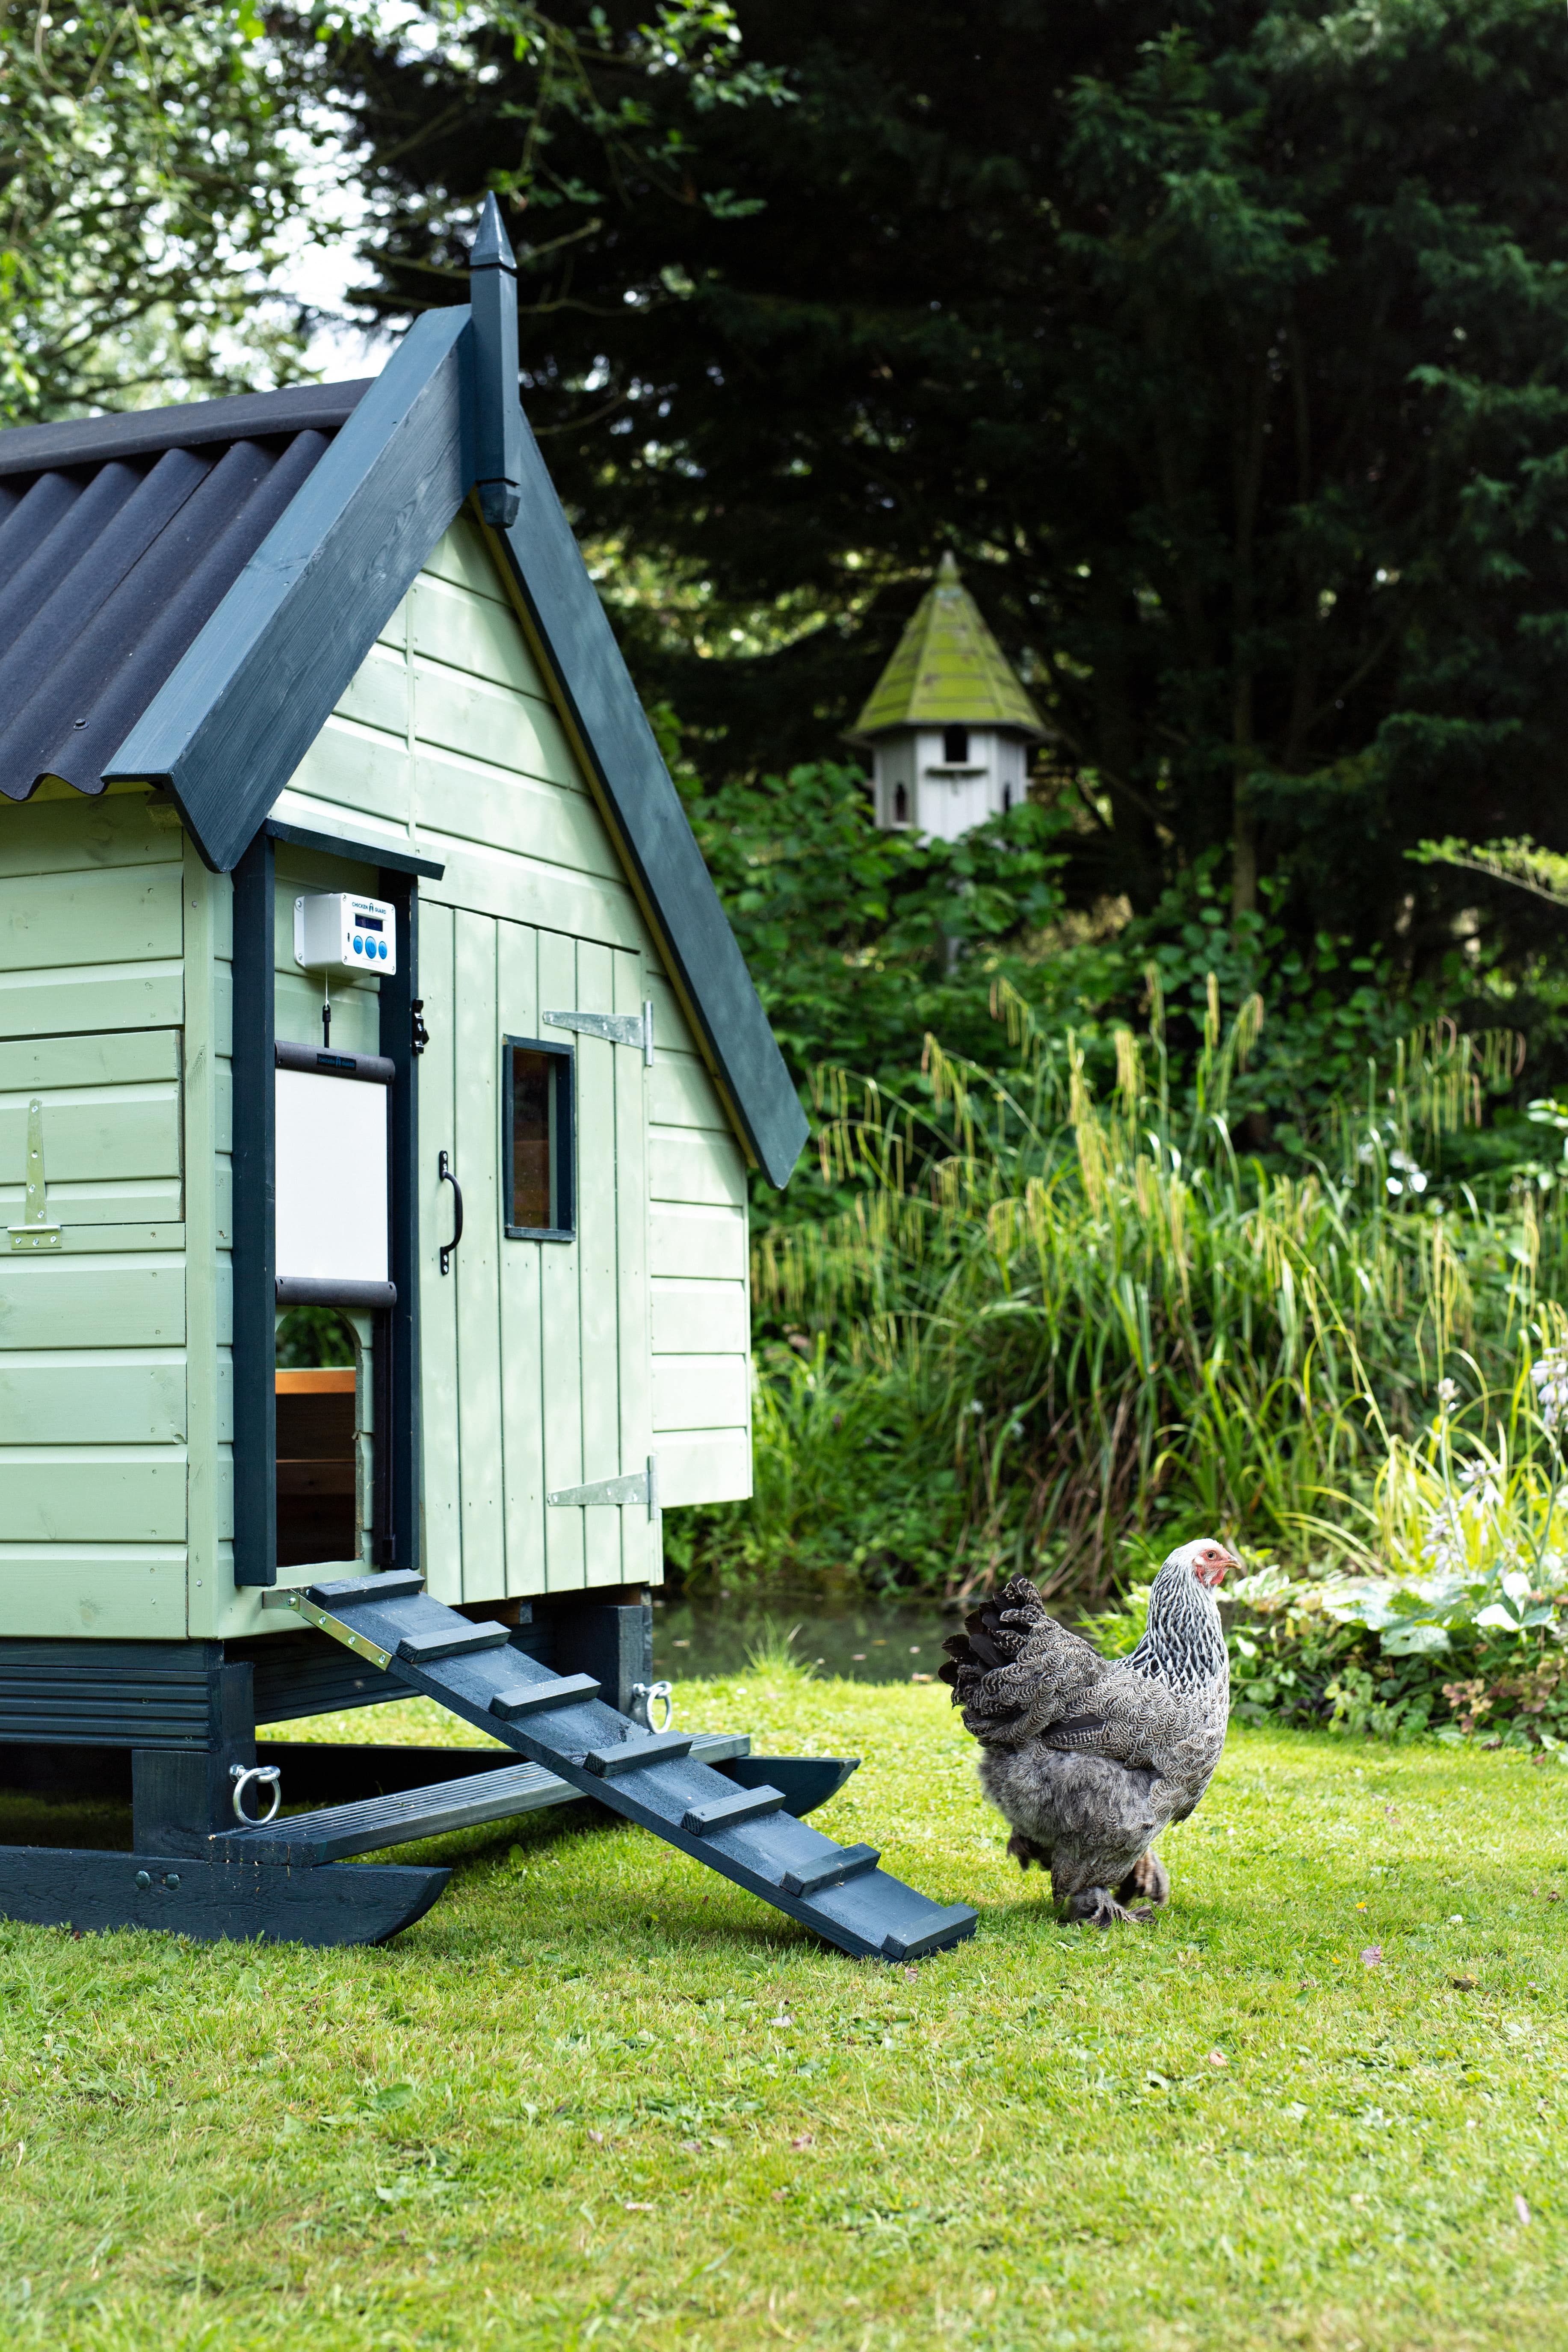 Find out while your chickens will love ChickenGuard at Global Pet Expo!